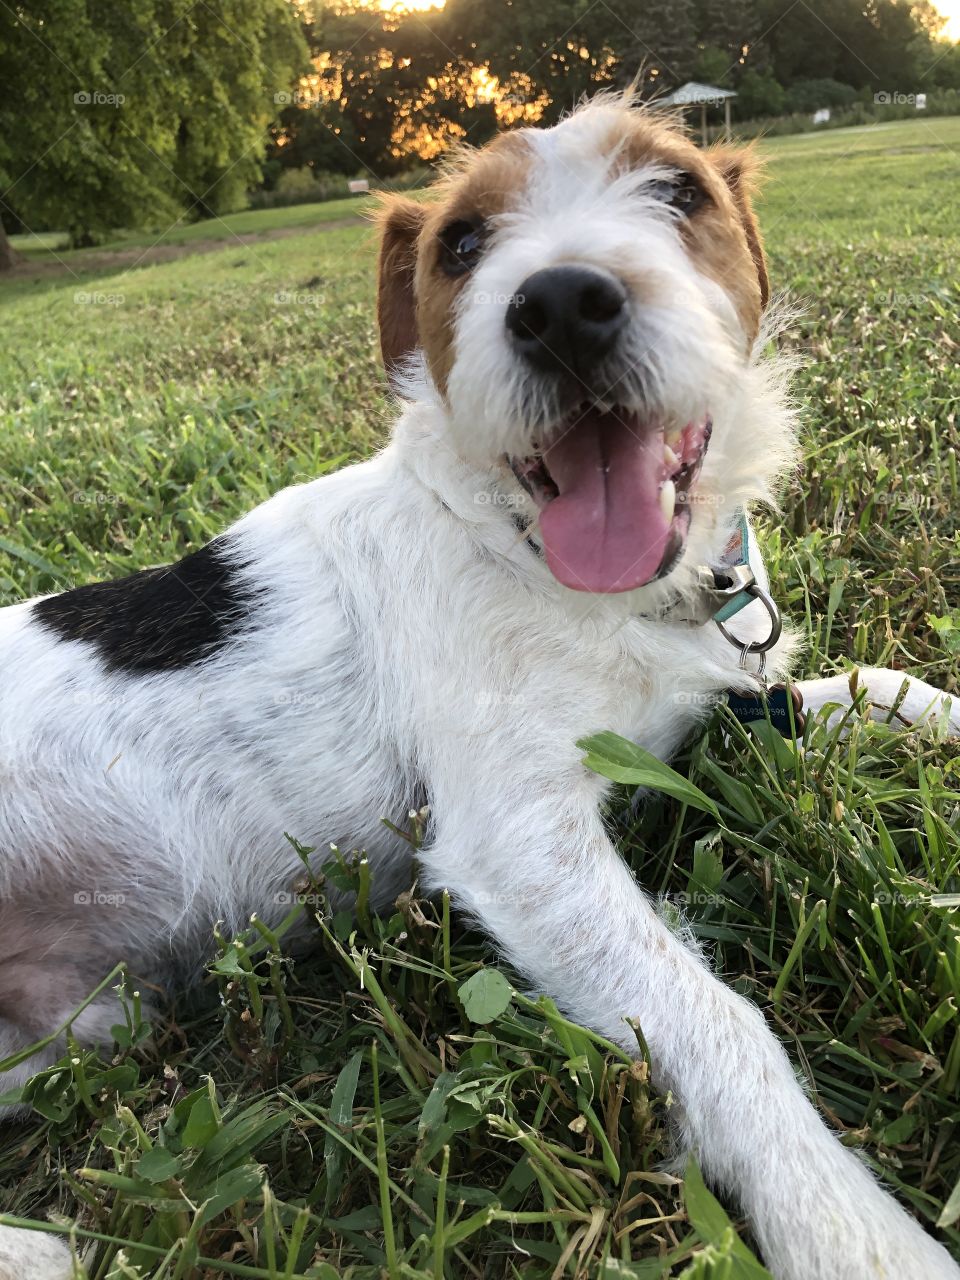 Dog smiling while laying in grass 